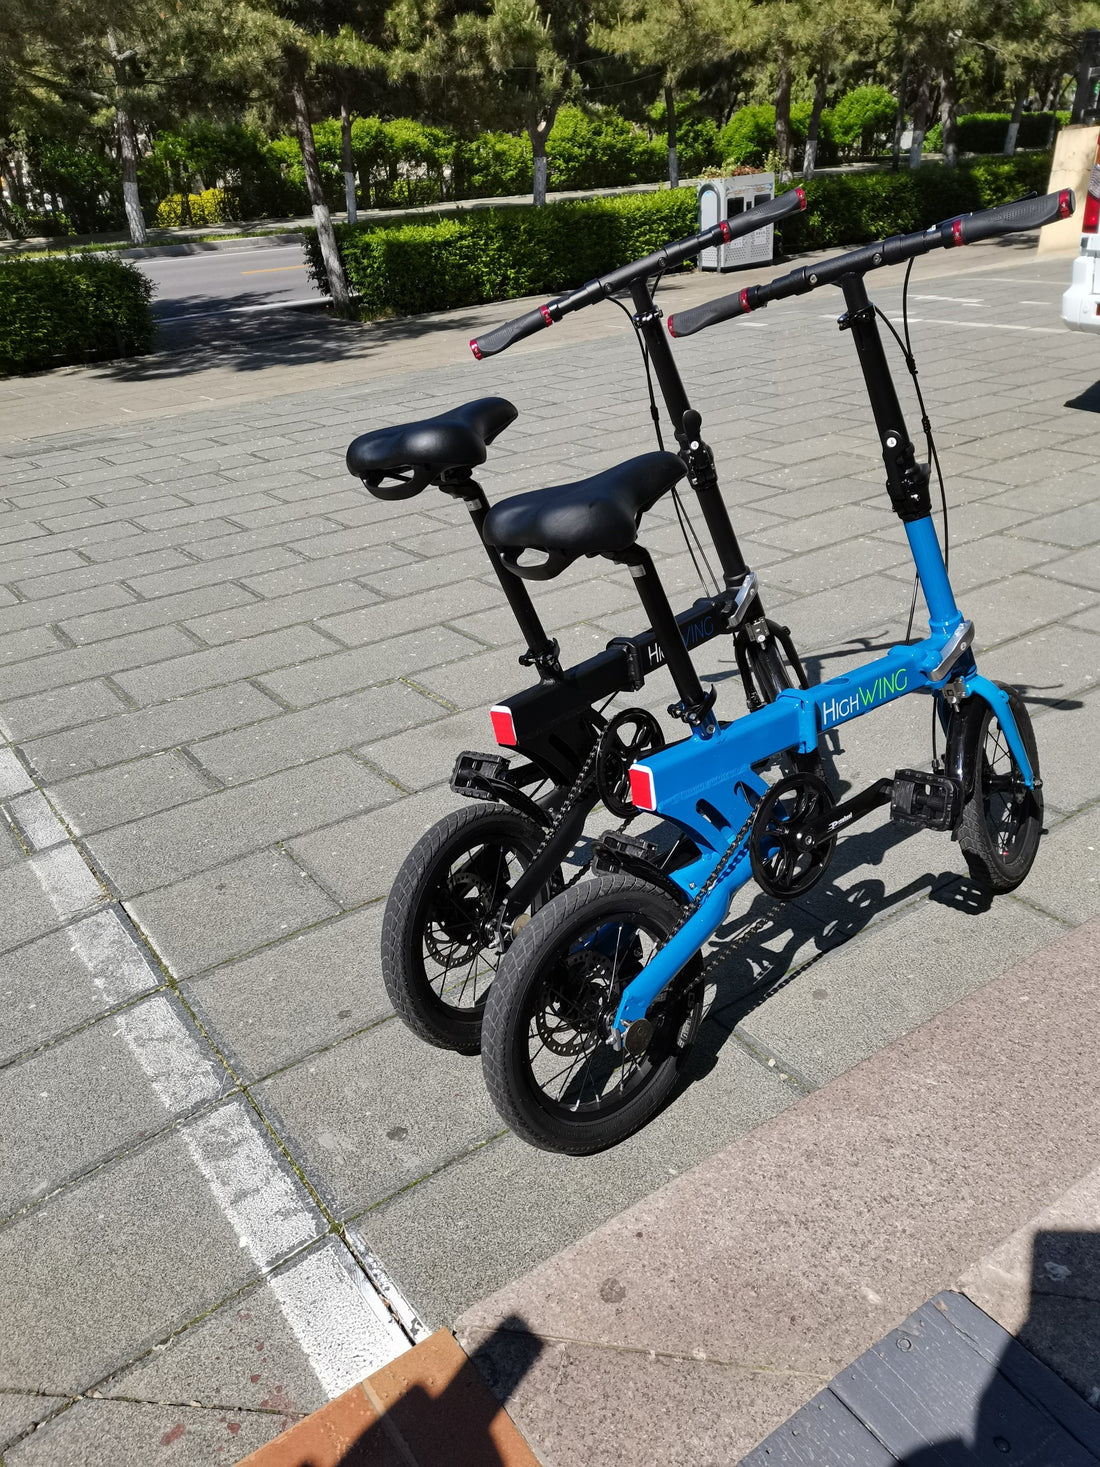 A small folding bike is not enough, you need 2 double bikes, so you can ride Highwing Bike happily with your family or friends